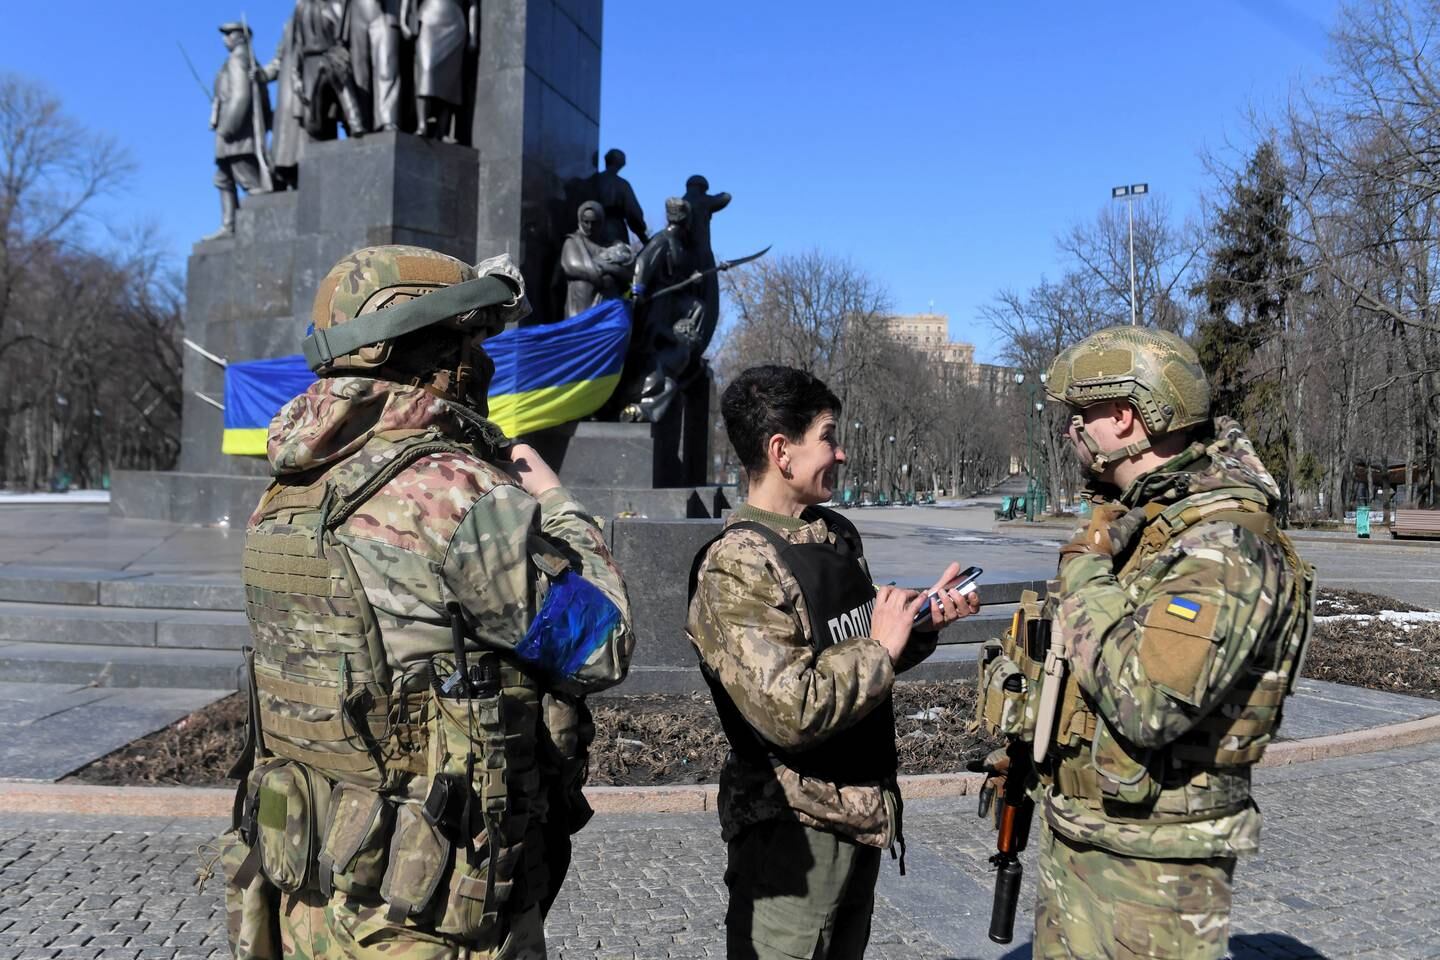 Ukrainian soldiers stand in front of the Taras Shevchenko monument in Kharkiv. EPA / ANDRZEJ LANGE POLAND OUT